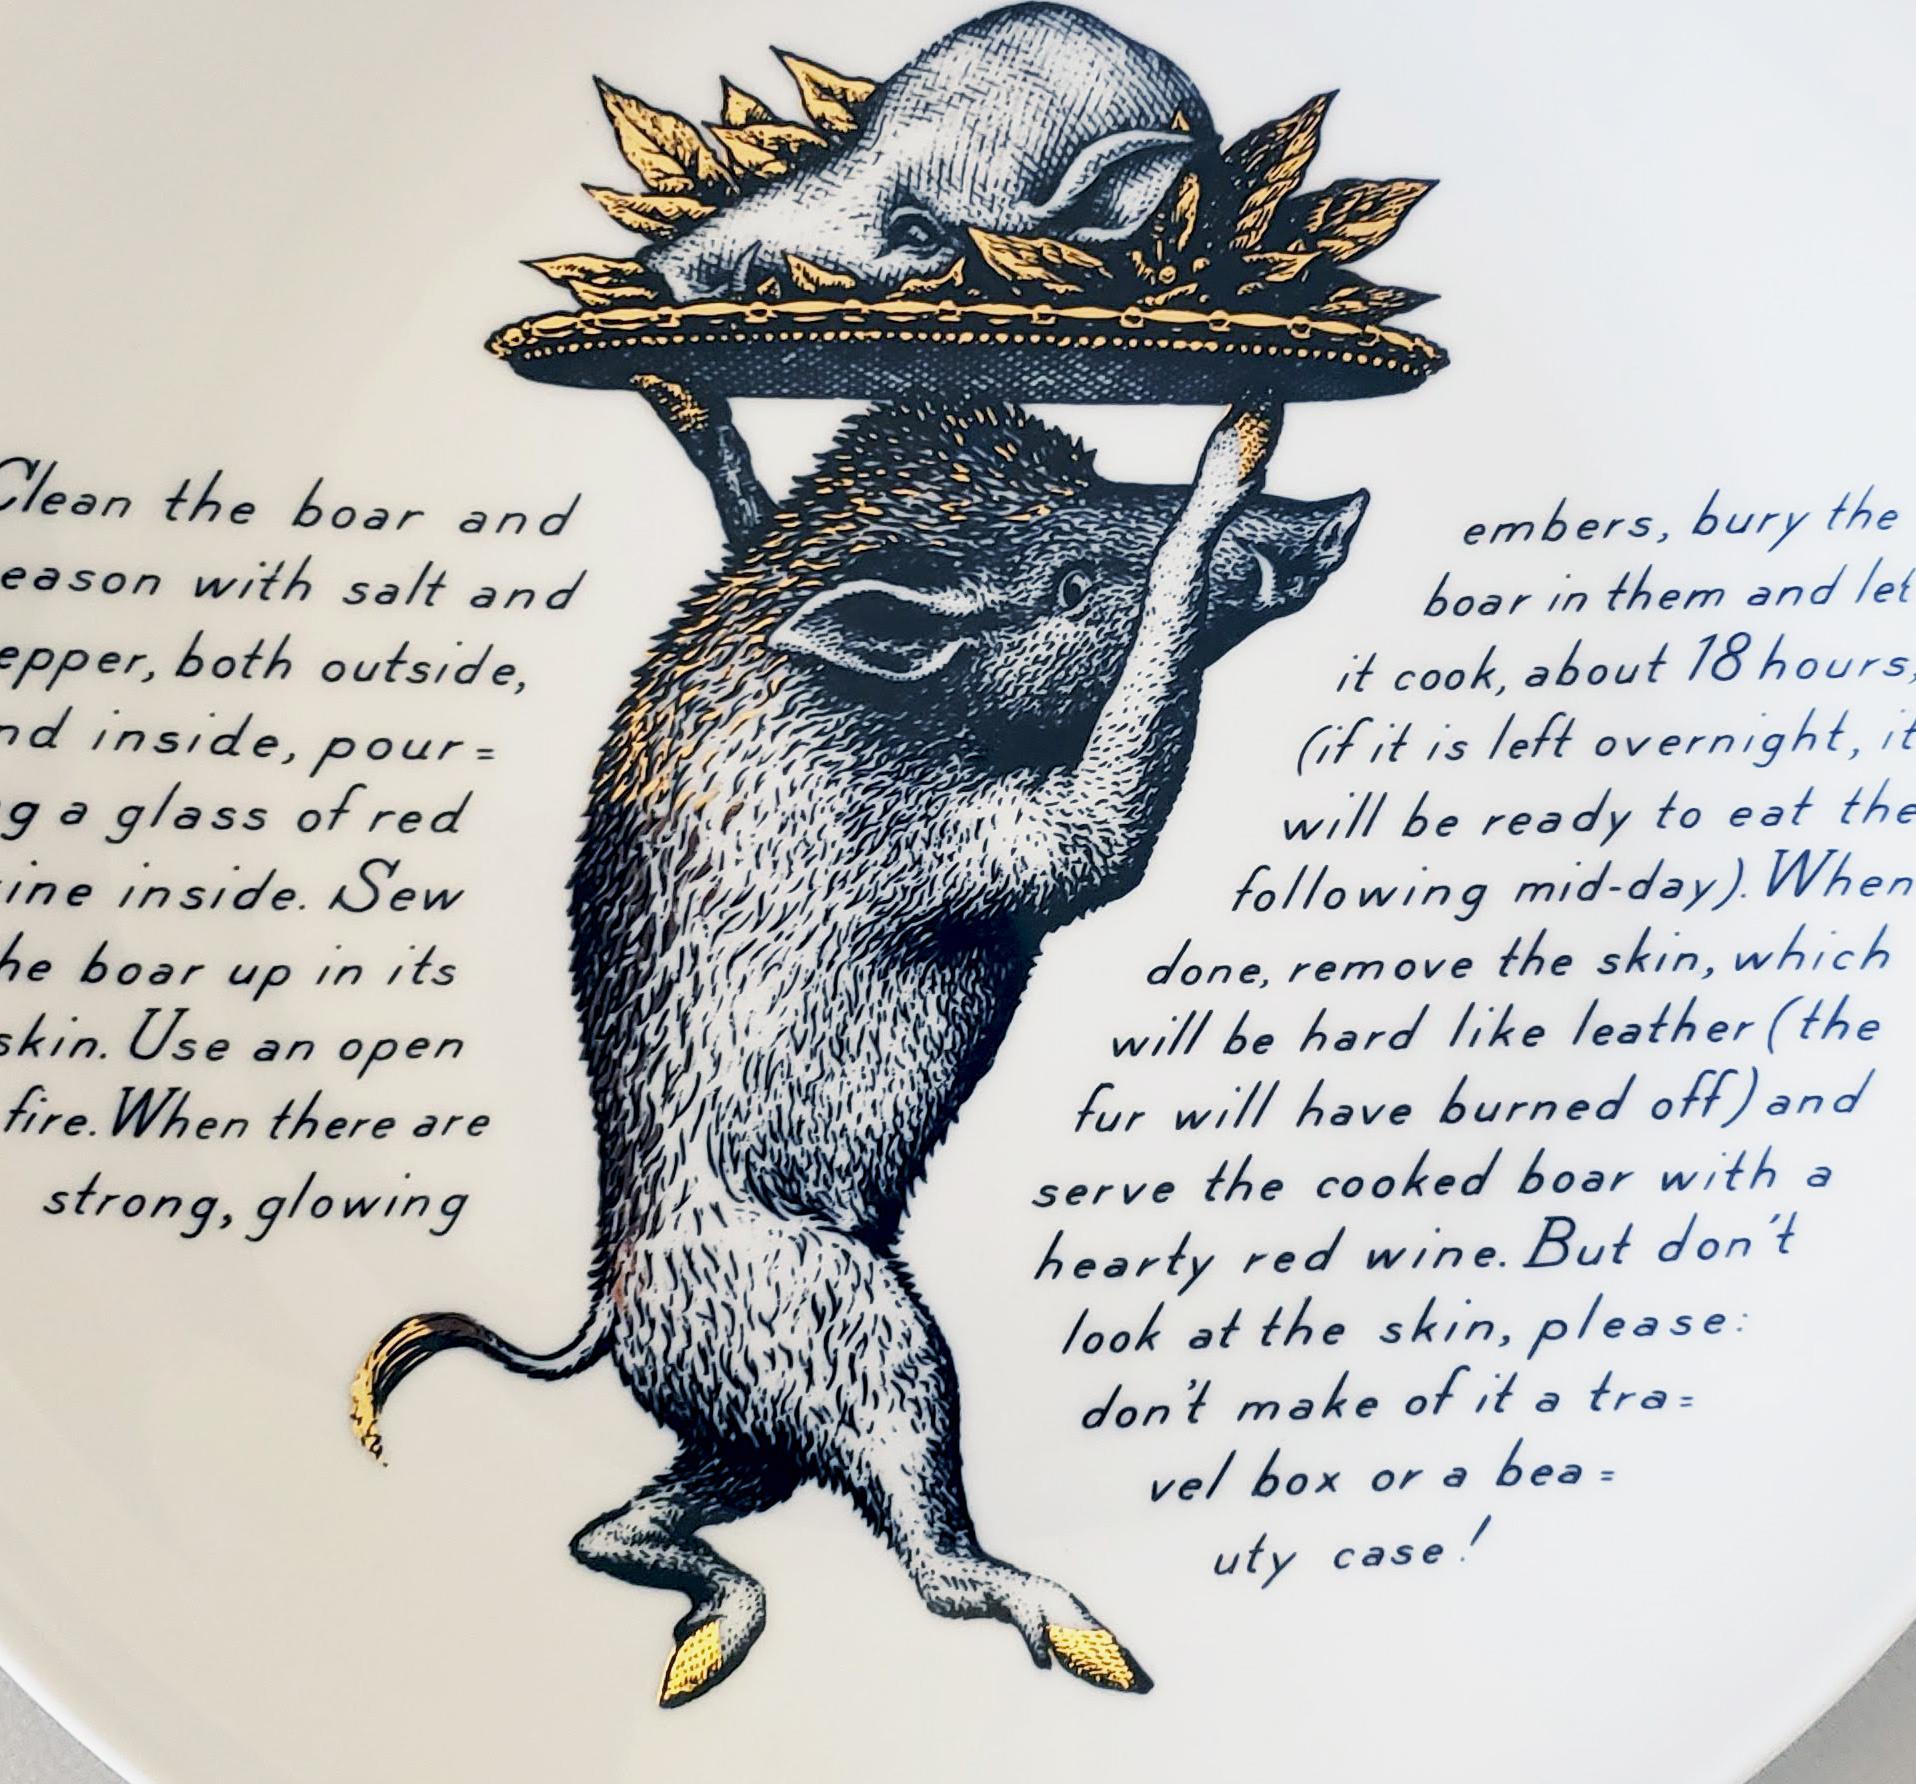 Piero Fornasetti recipe plate,
Vero-Pig piccadilly,
Made for Fleming Joffe,
Silkscreen and transfer,
Early 1960s.

This rare Piero Fornasetti plate is from a series made for the Fleming Joffe company in New York City.

Measures: diameter 10